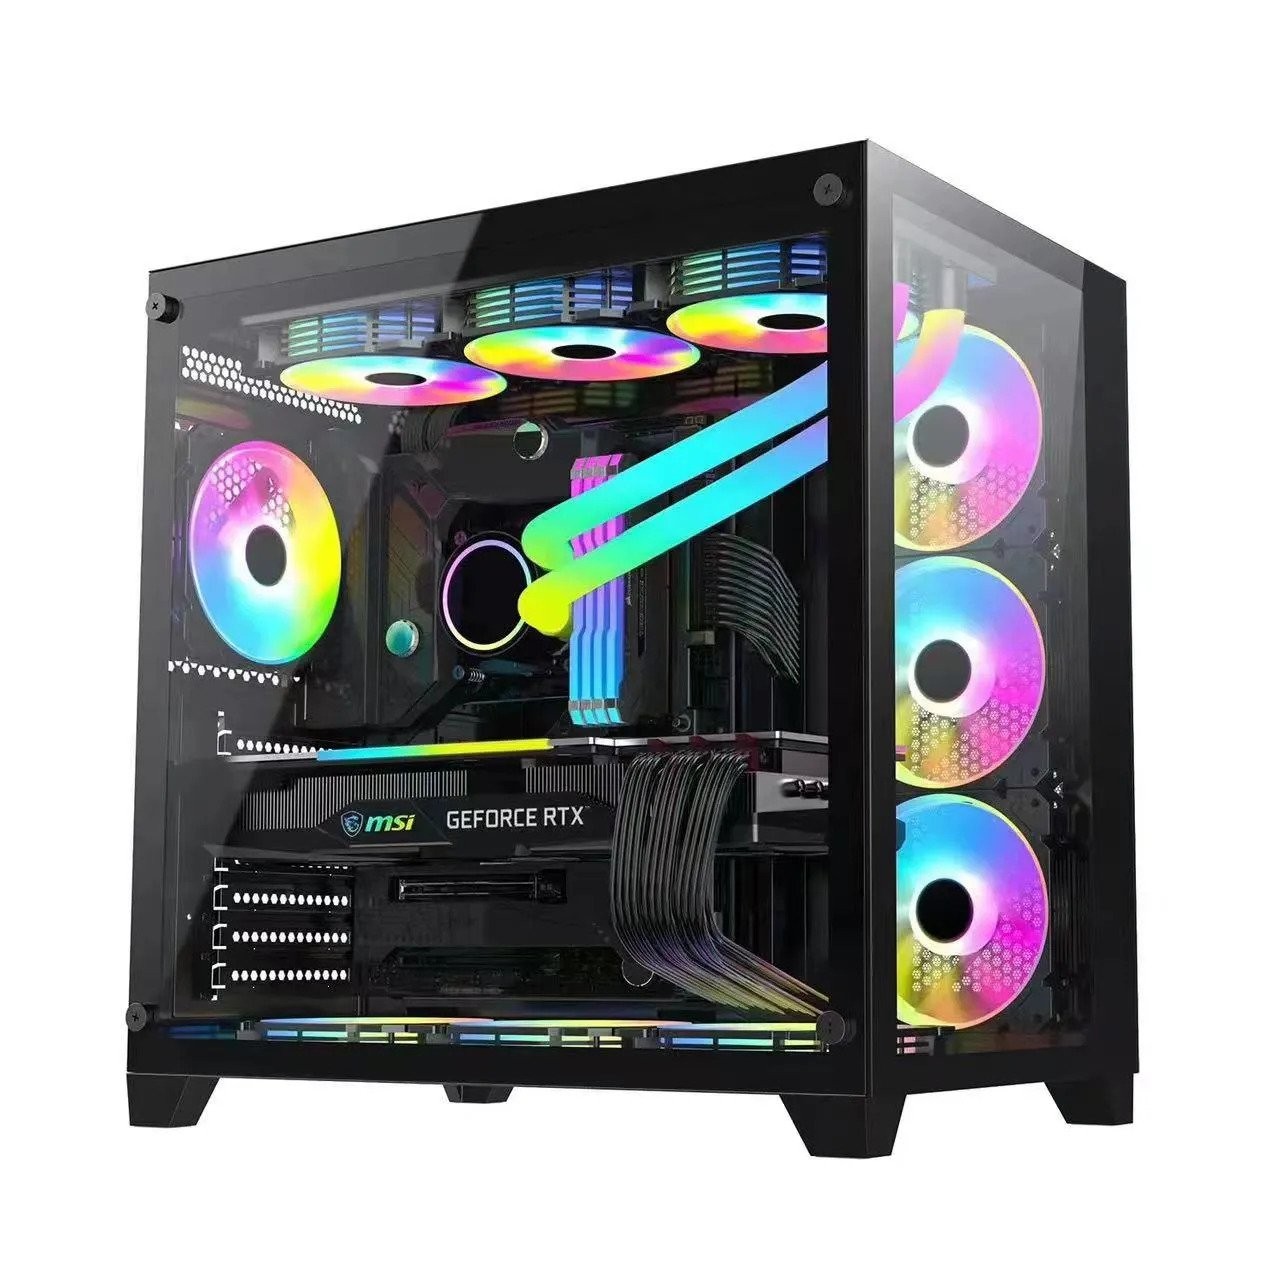 Product Page After Image | Gadget Fest PC Power ICEBERG Mid Tower ATX Gaming Case